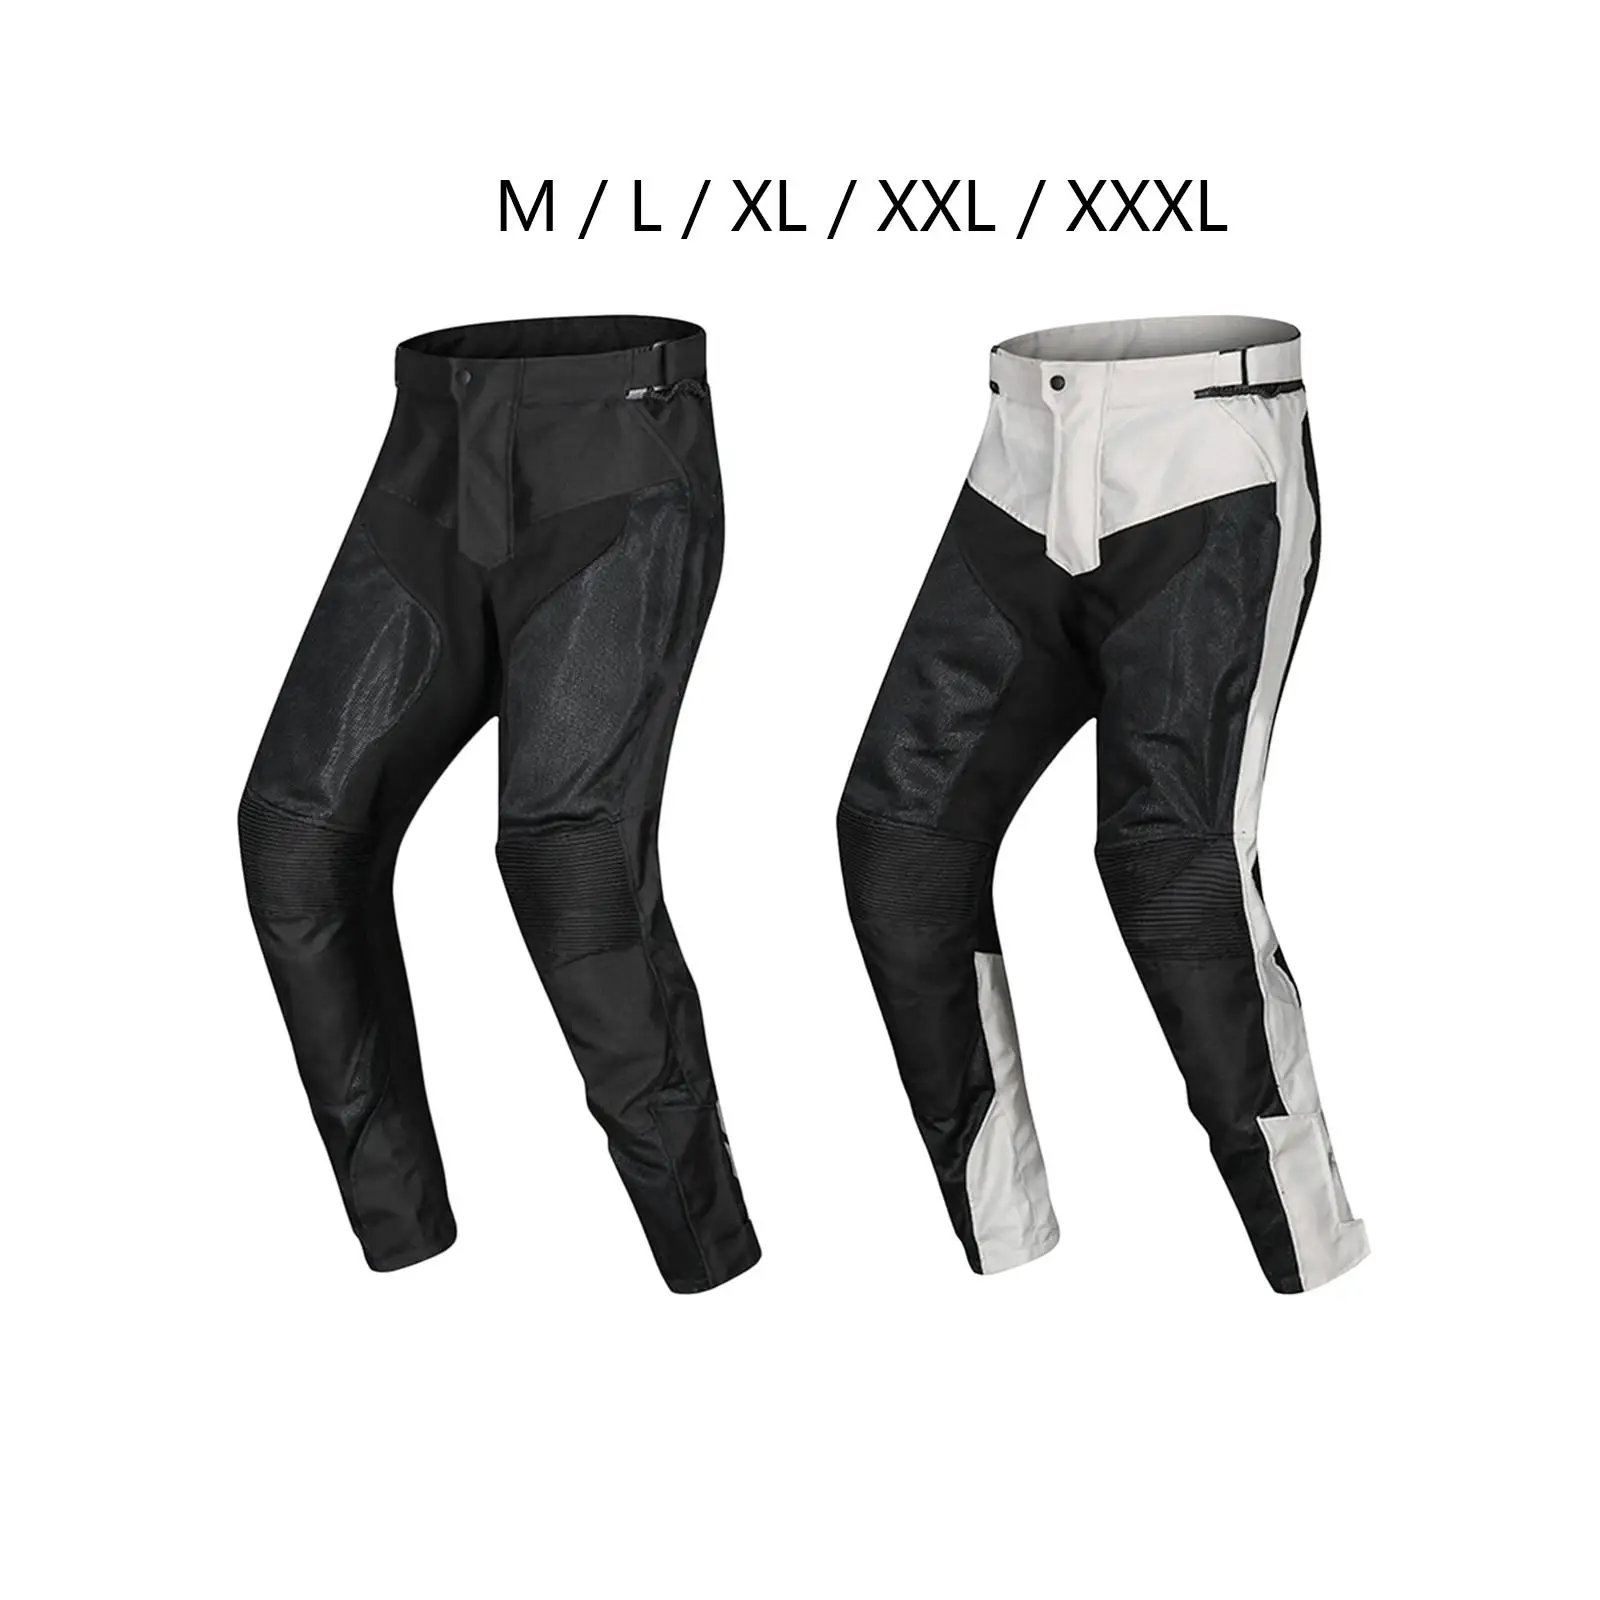 All season motorcycle pants for motocross racers for men and women